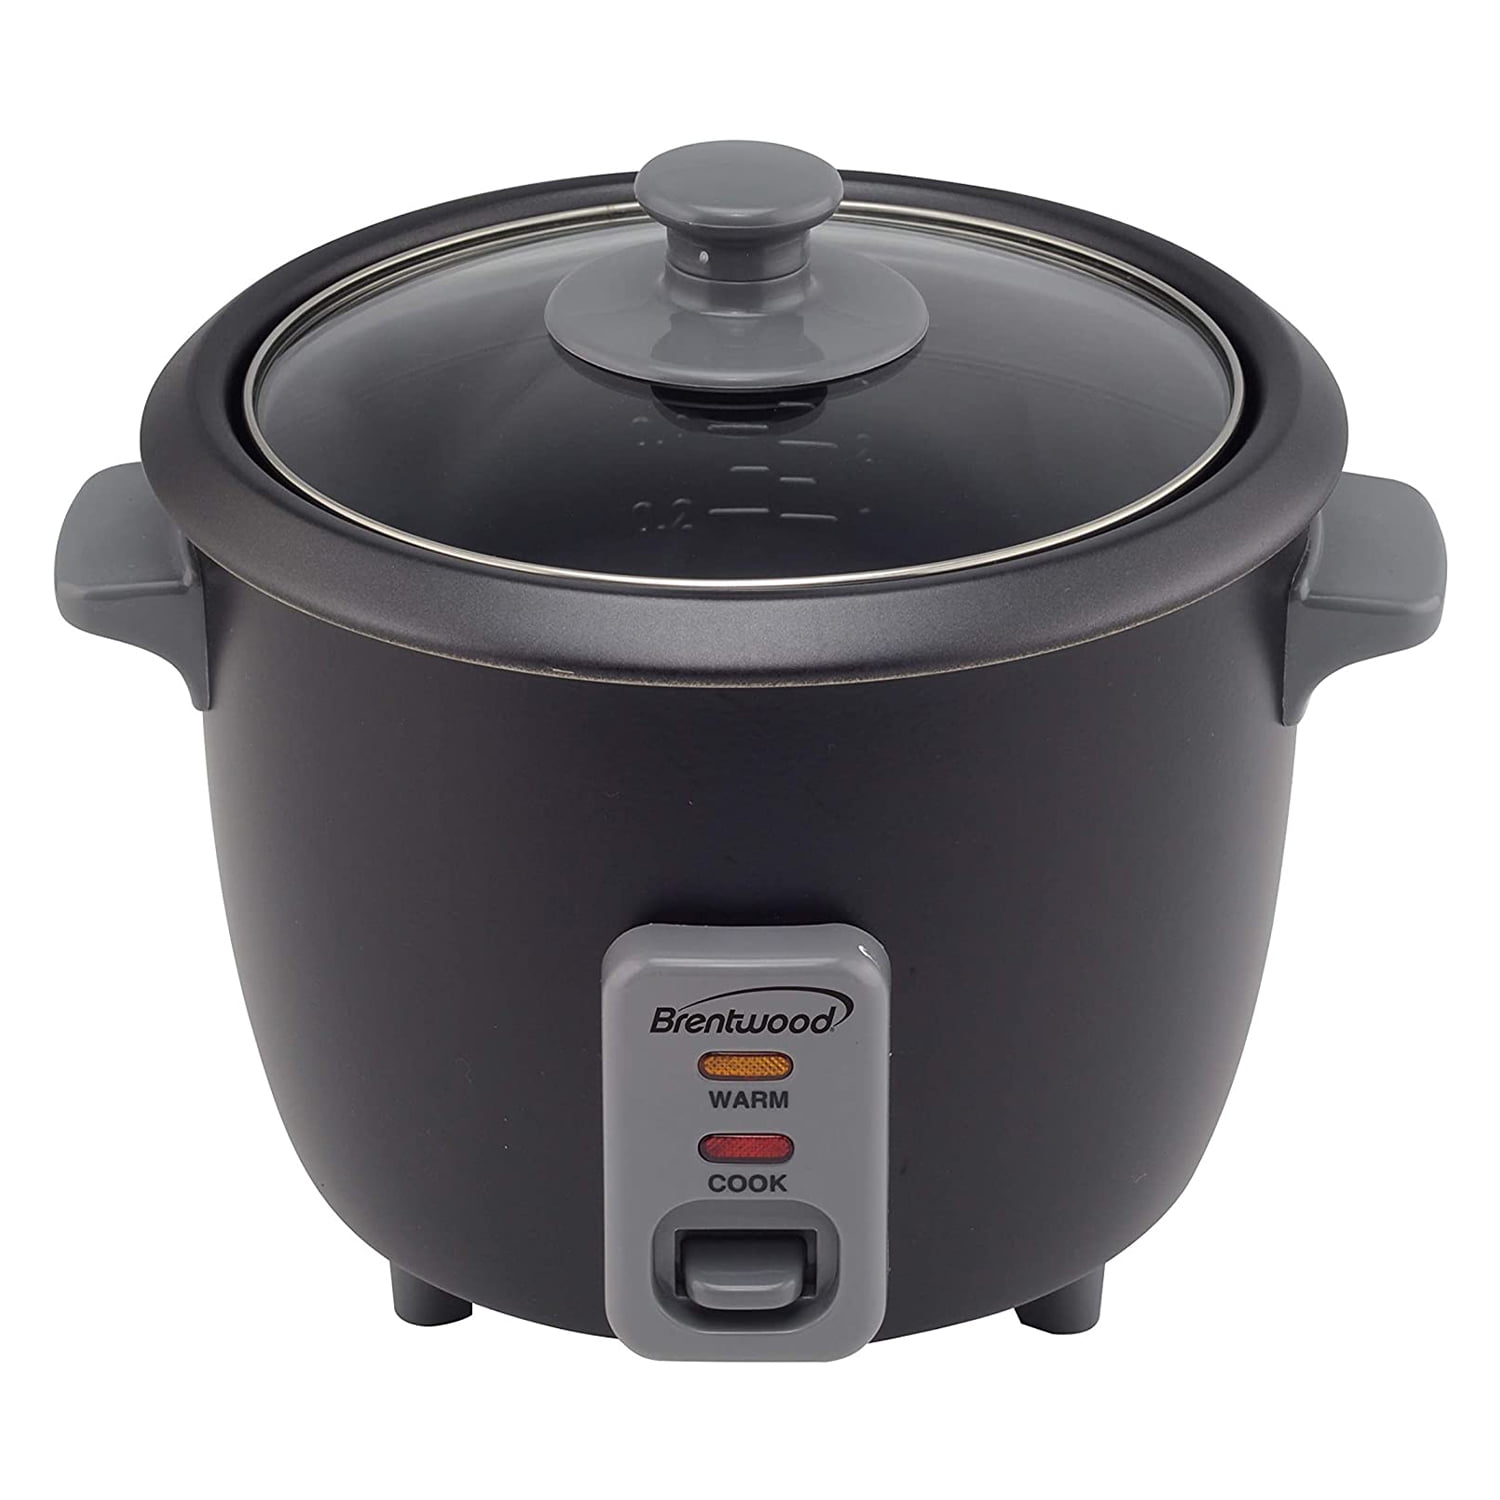 Food Steamer, TS-700BK Cooked 4-Cup Black Rice Brentwood Cooker and Uncooked/8-Cup